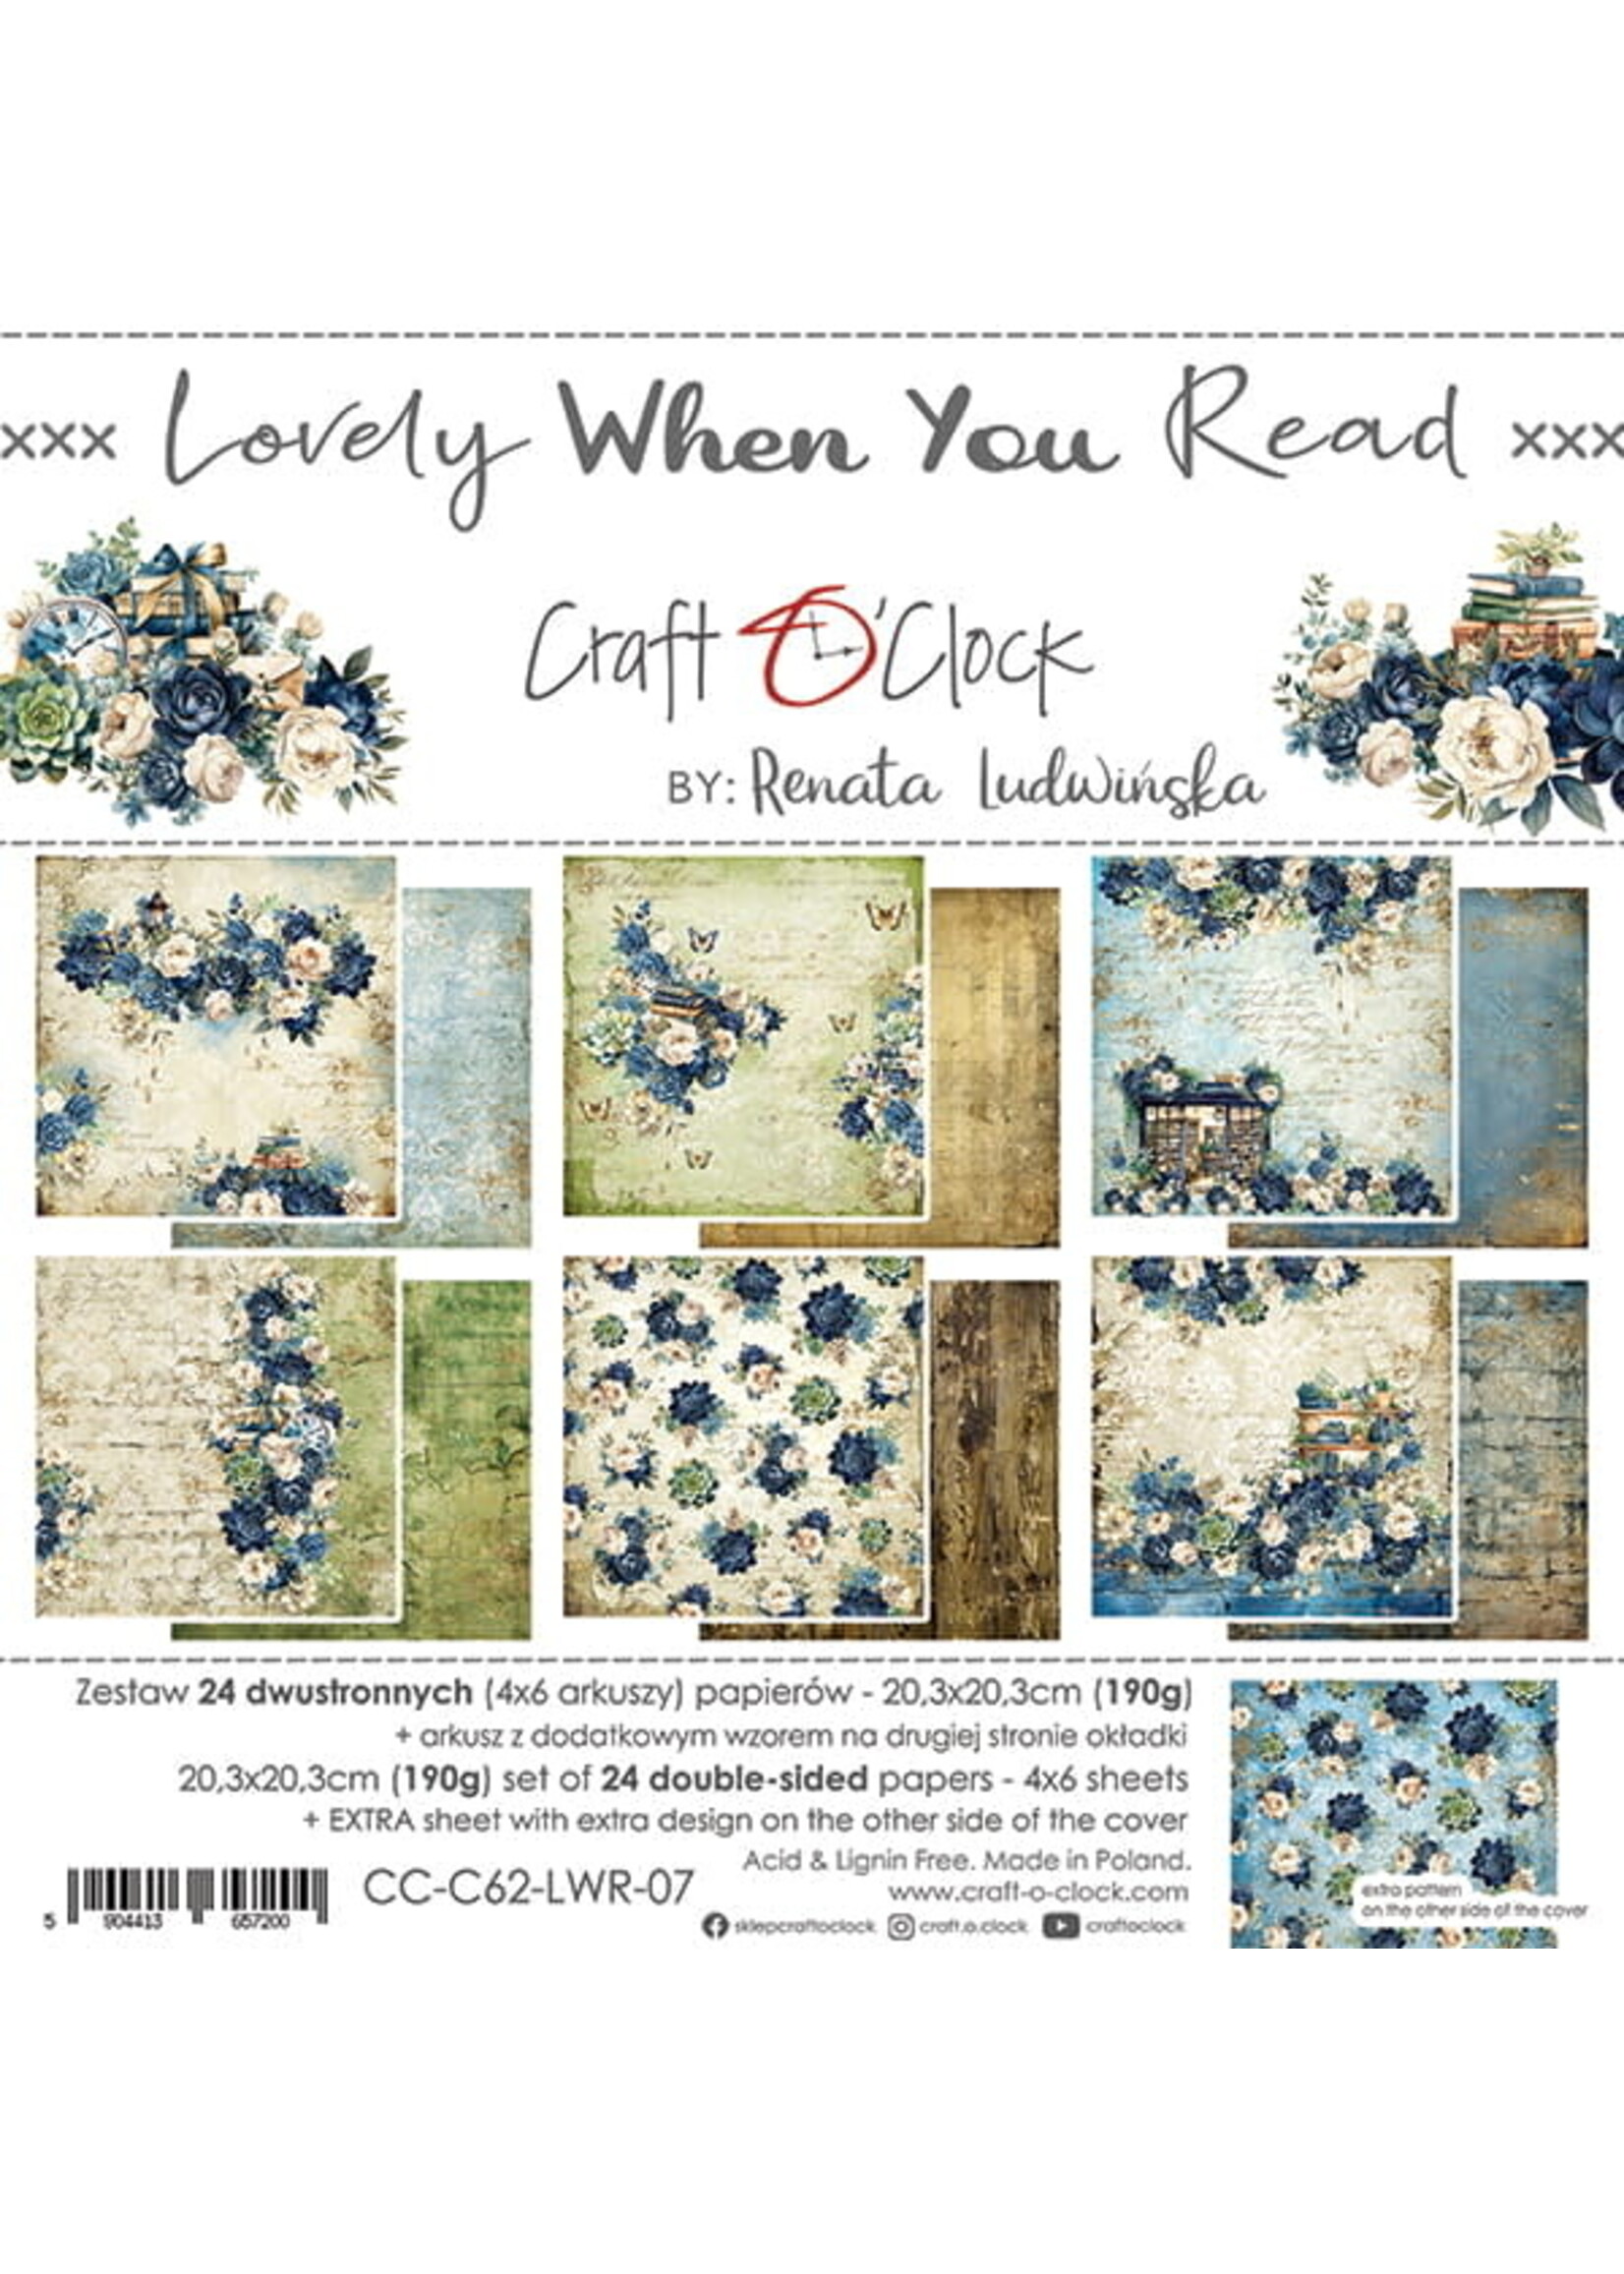 Craft O Clock LOVELY WHEN YOU READ - A SET OF PAPERS 20,3X20,3CM